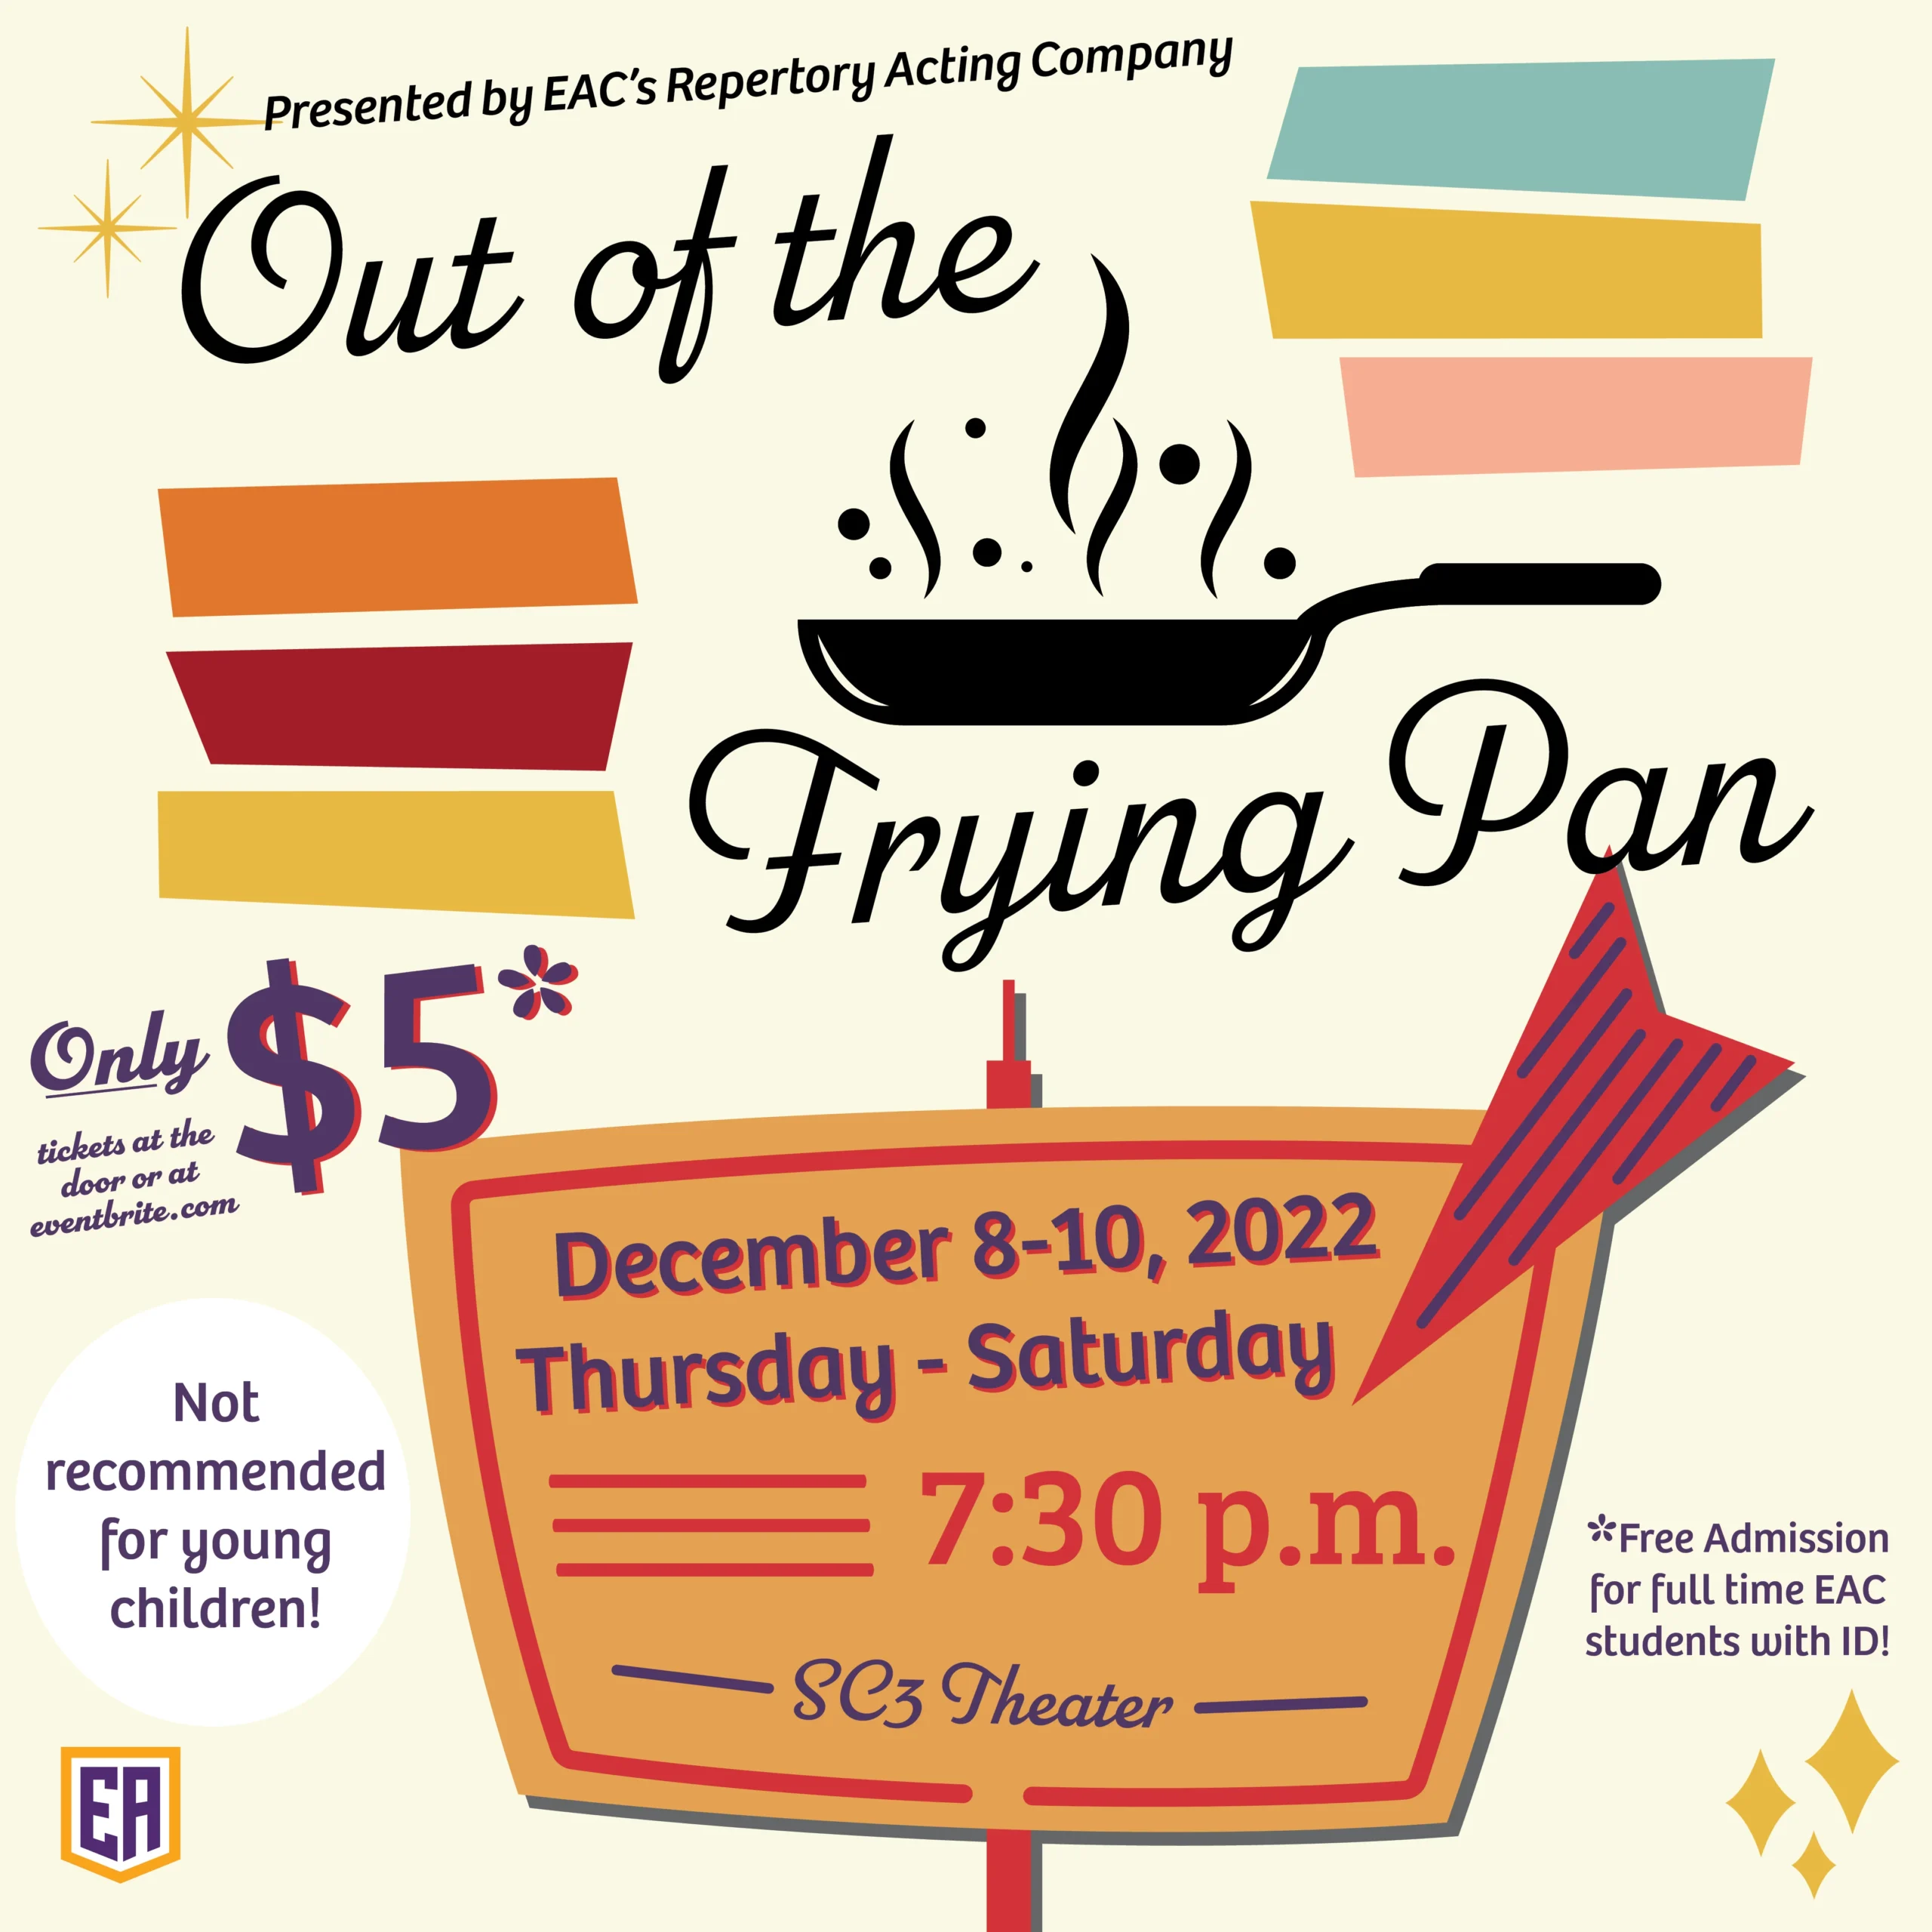 Eastern Arizona College Repertory Theatre presents: Out of the Frying Pan